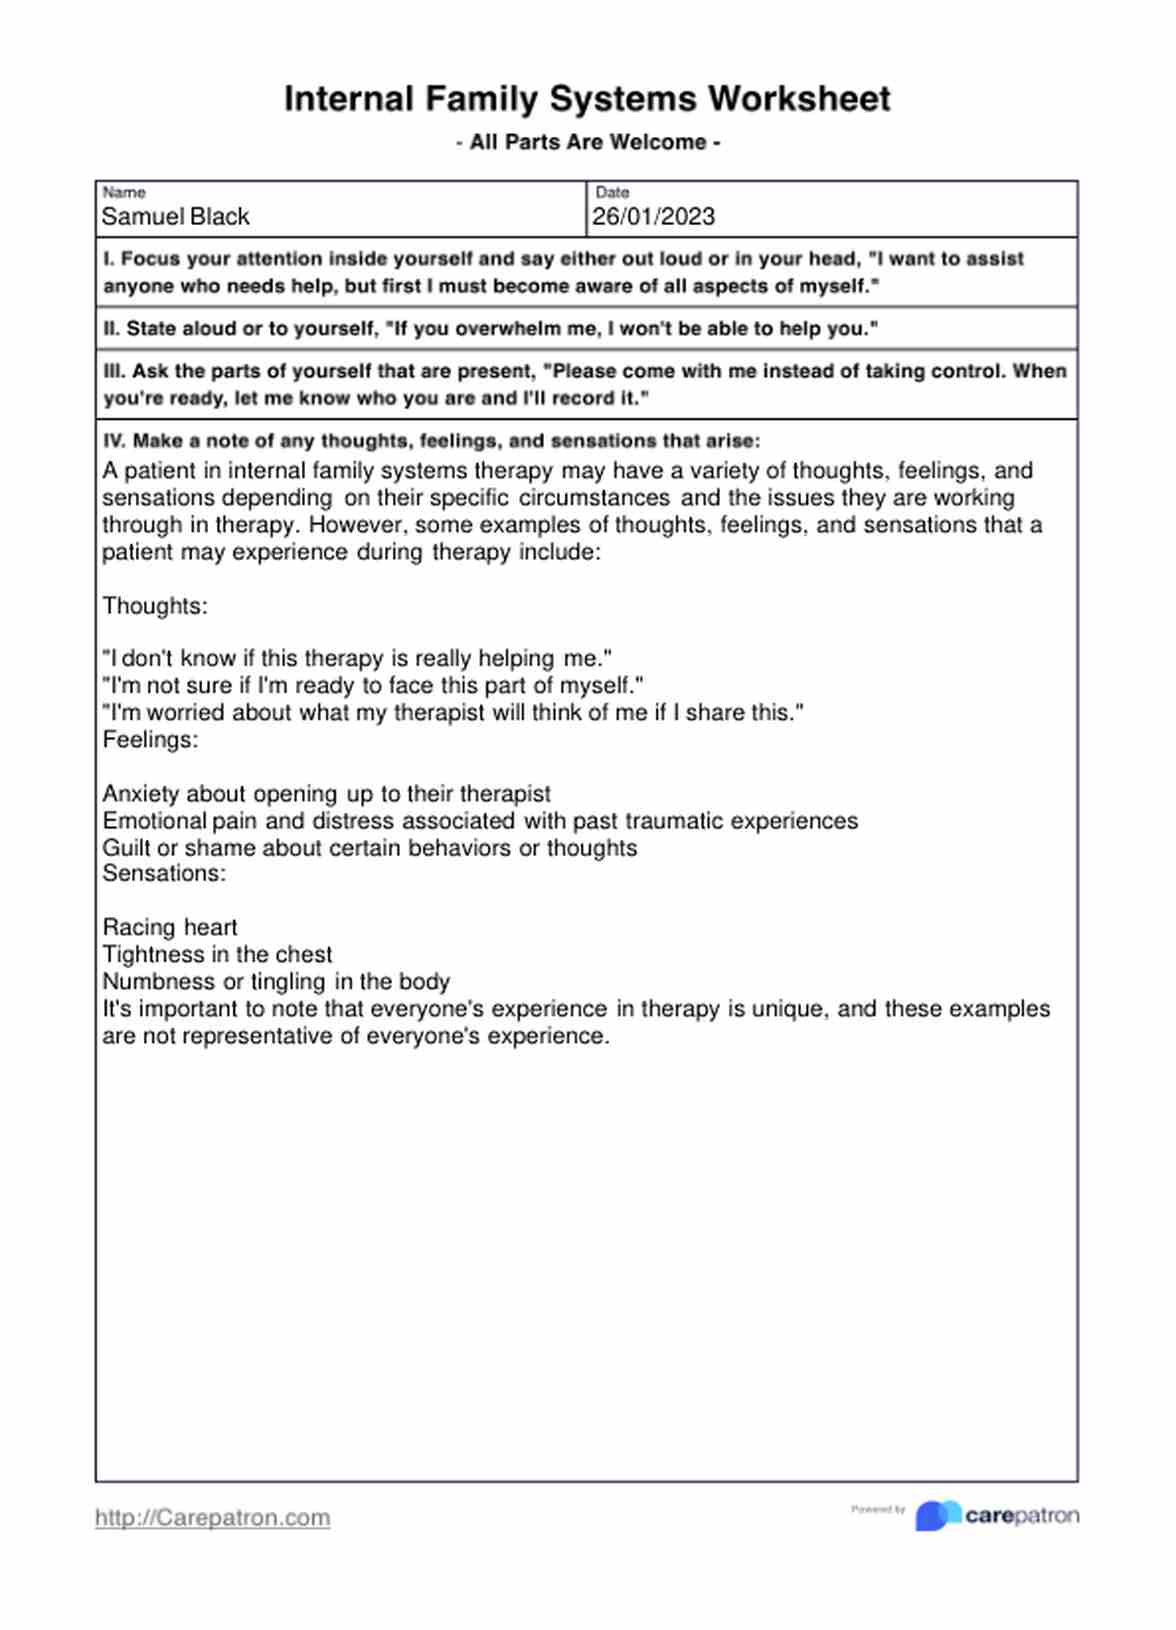 Internal Family Systems Worksheets PDF Example